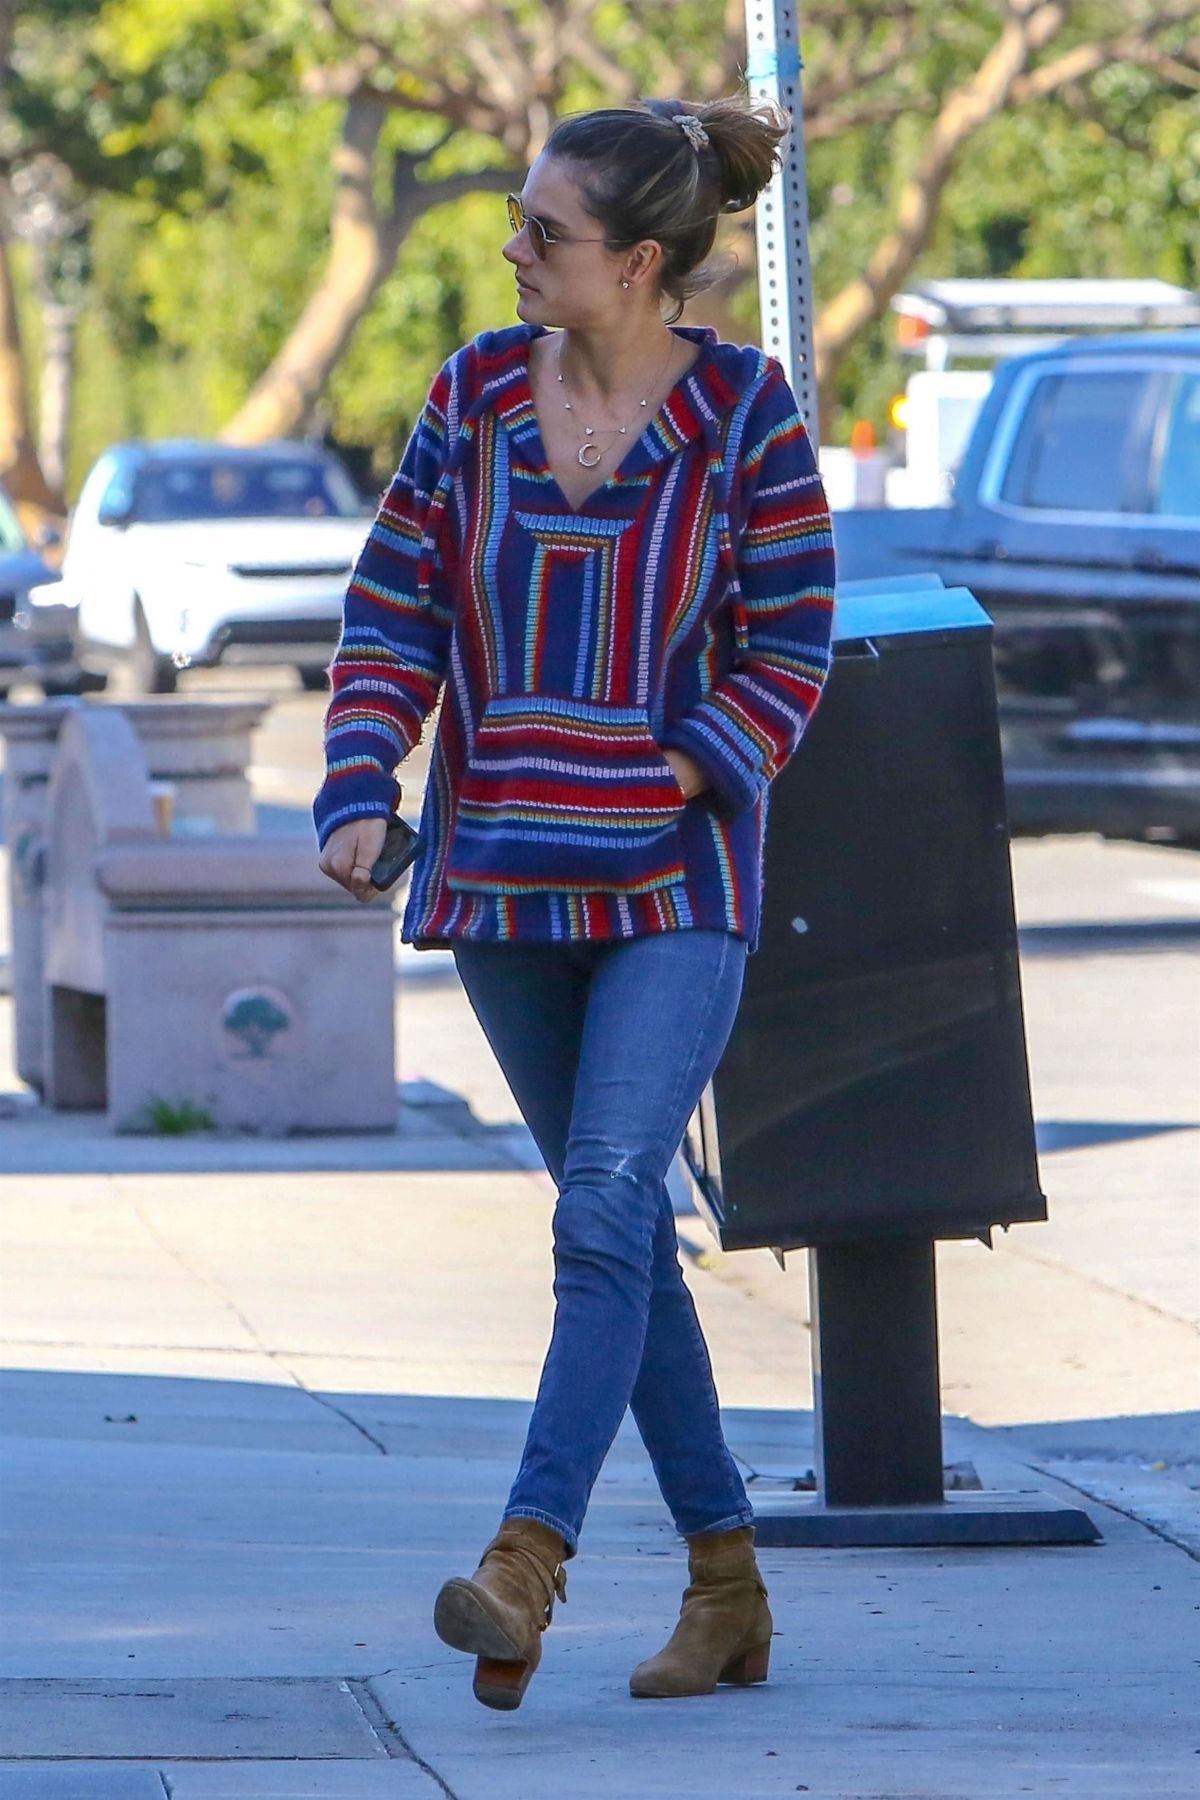 alessandra-ambrosio-out-and-about-in-brentwood-02-11-2019-1.jpg